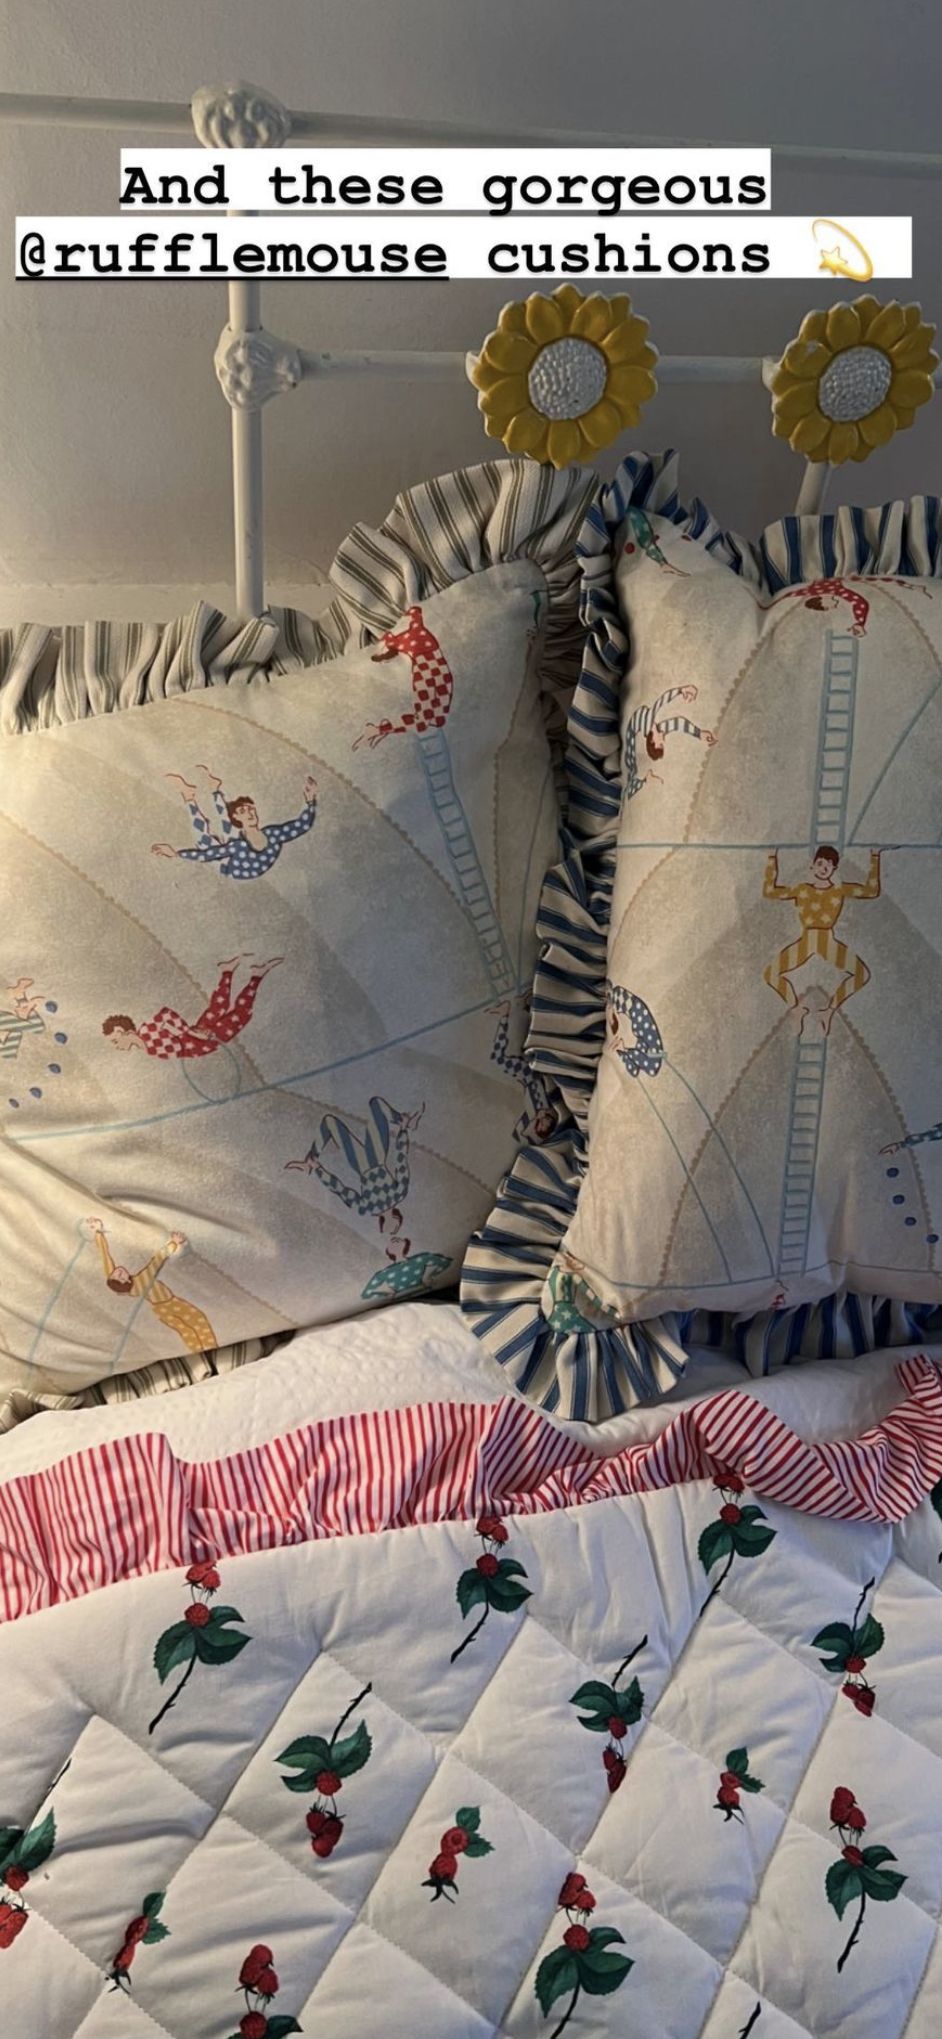 Carrie Johnson's son's bedroom cushions with an acrobatic print